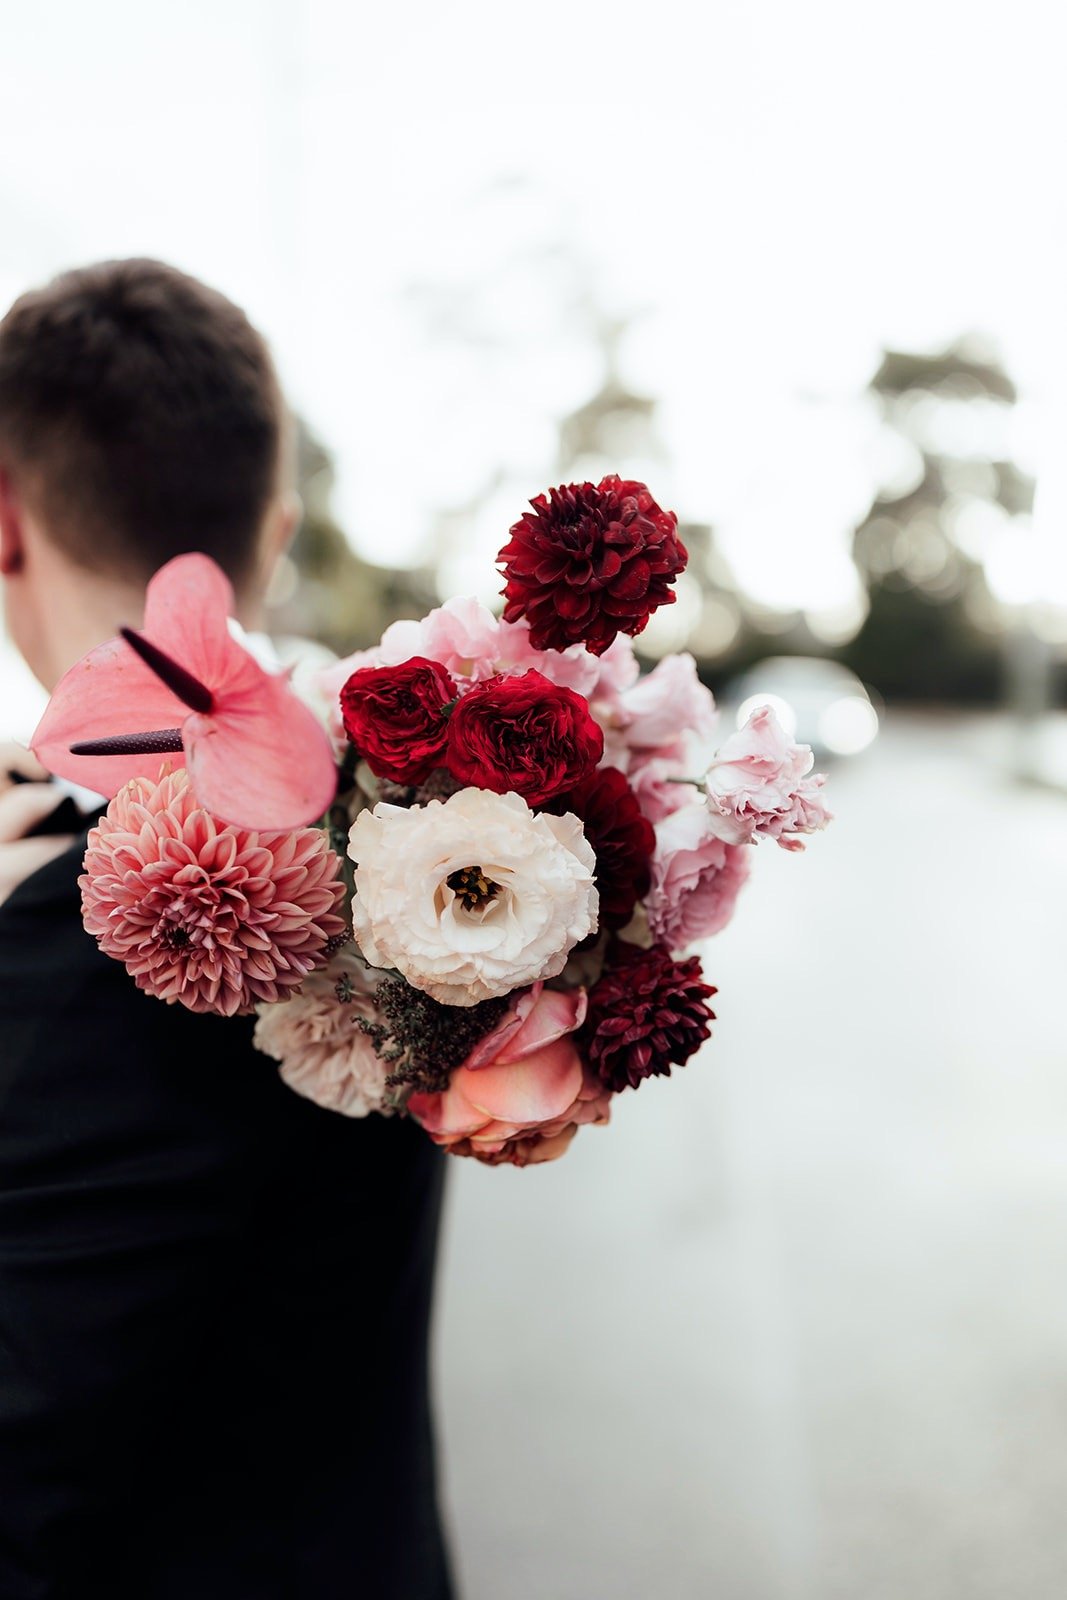 Elegance in Pink: A Captivating Bridal Bouquet